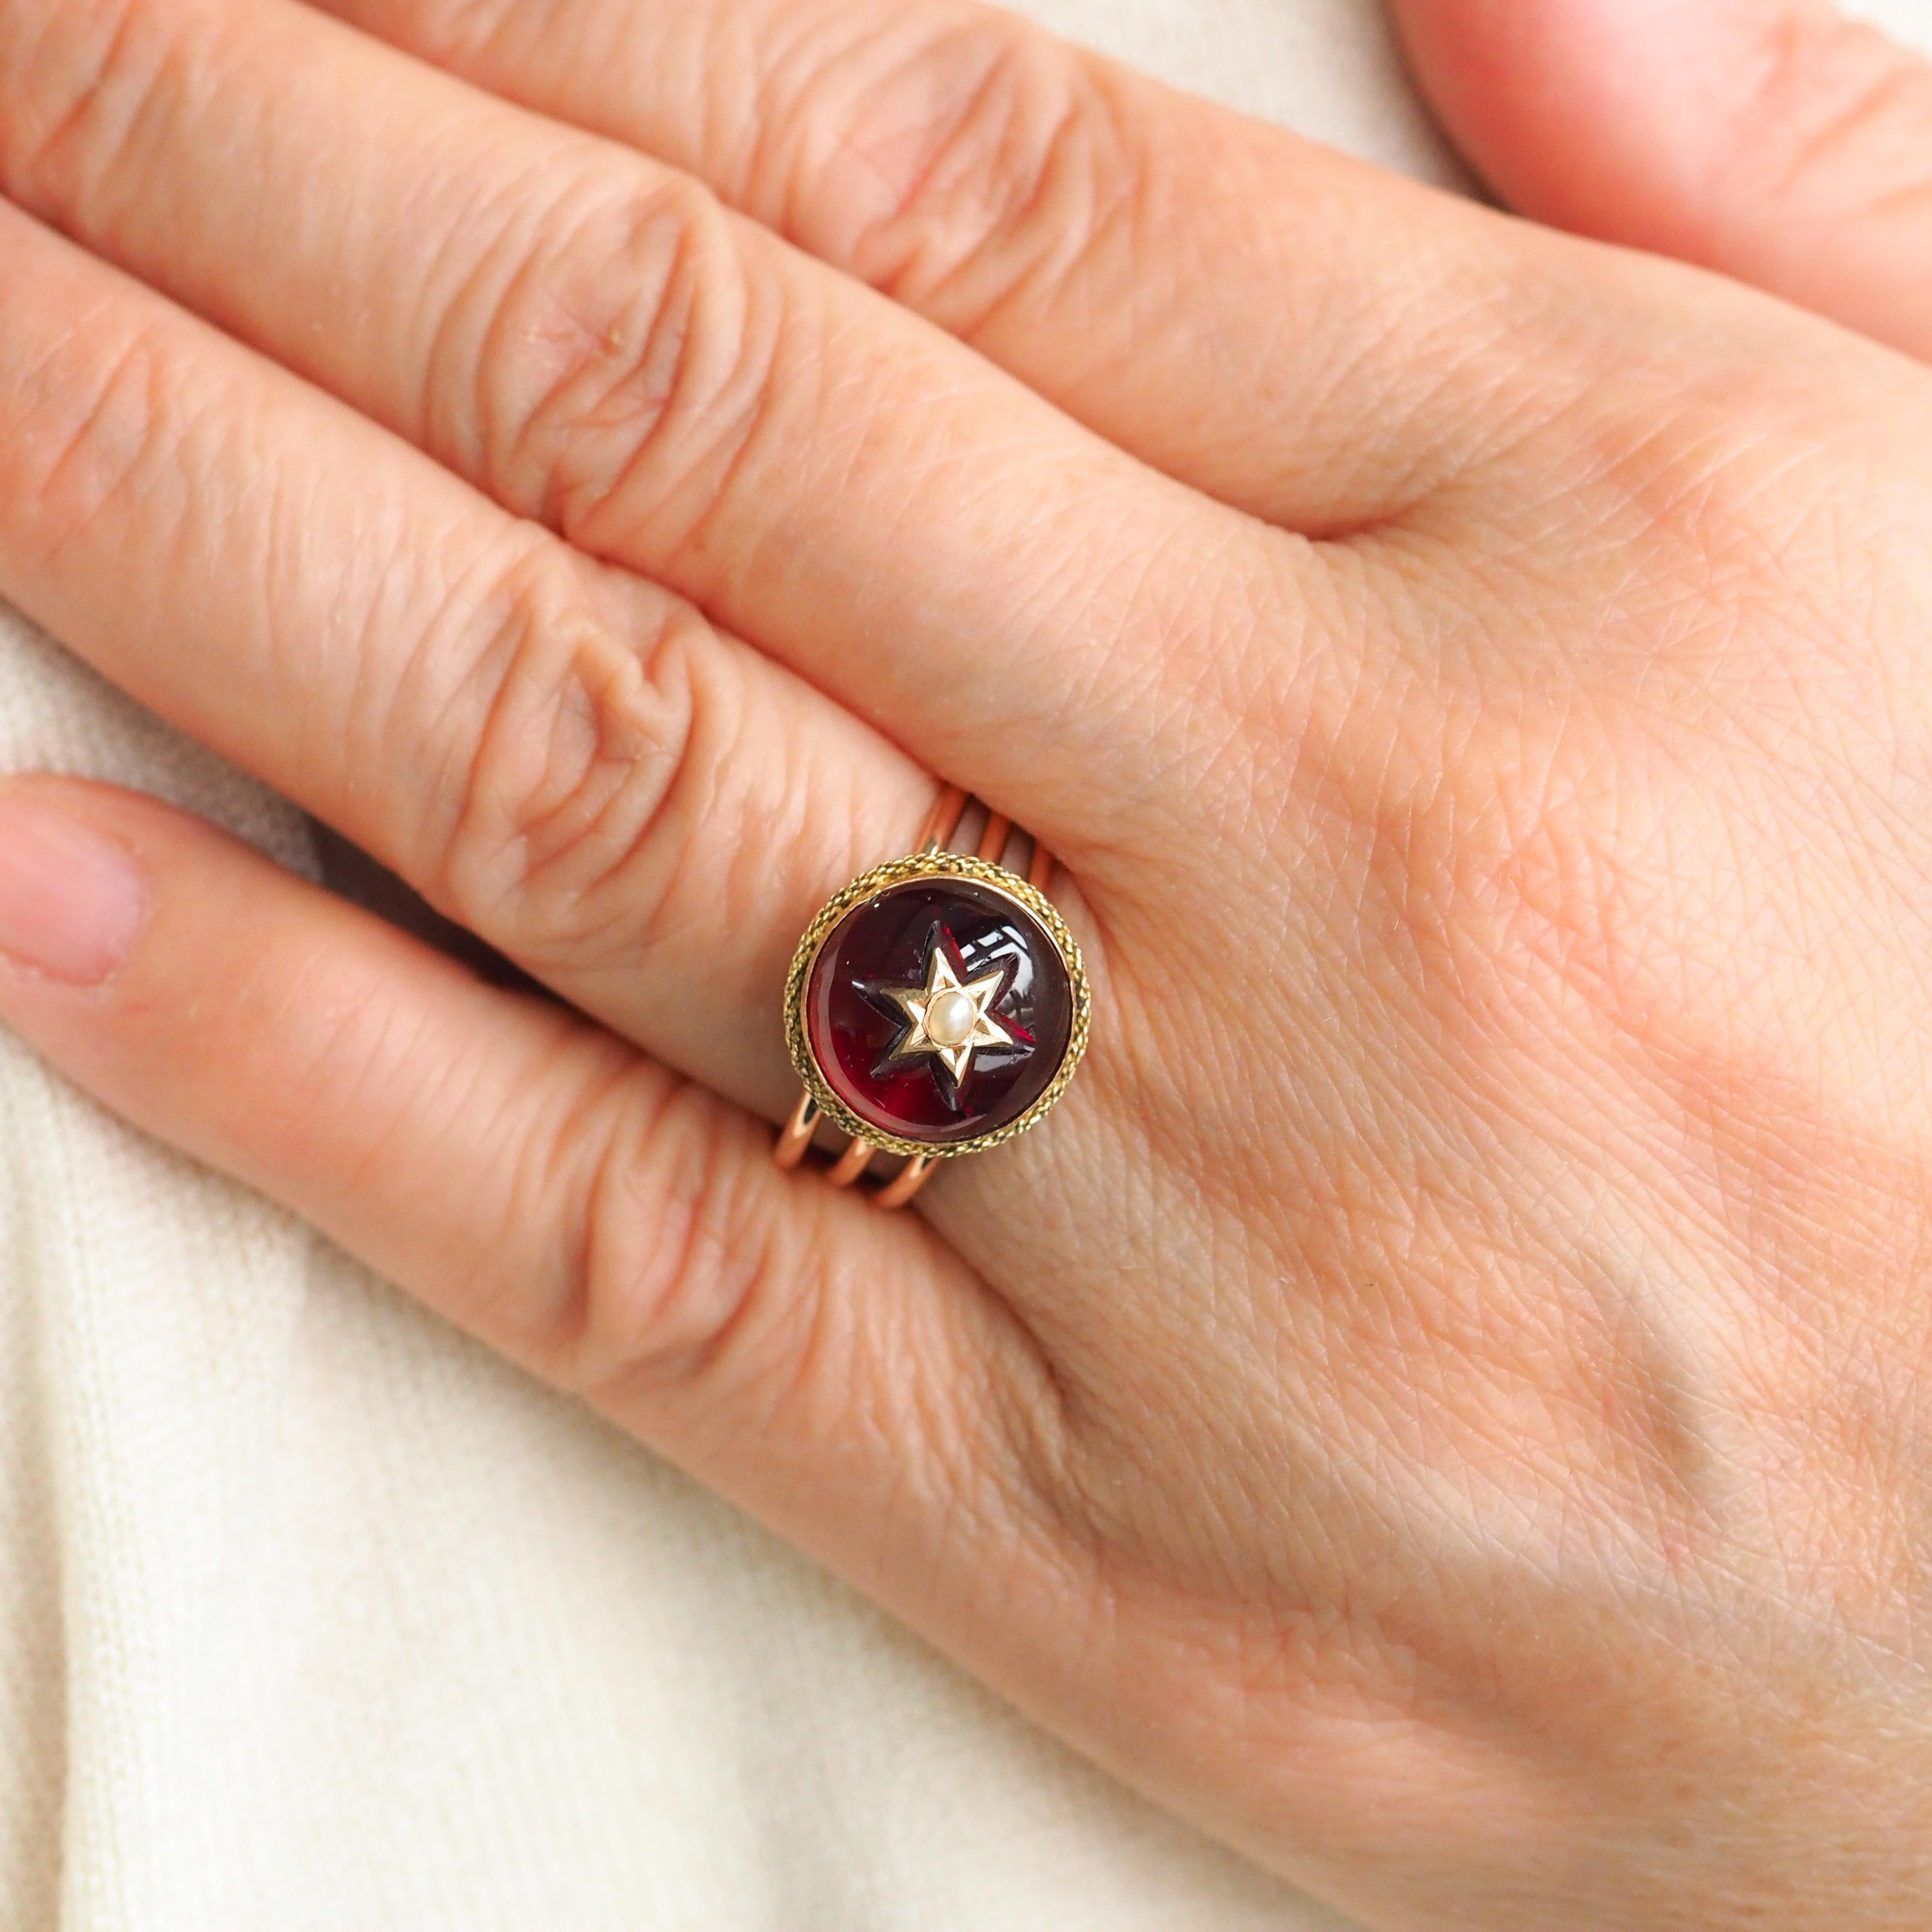 Antique Victorian 14K Gold Garnet Star Cabochon Ring with Seed Pearl - c.1880 For Sale 6